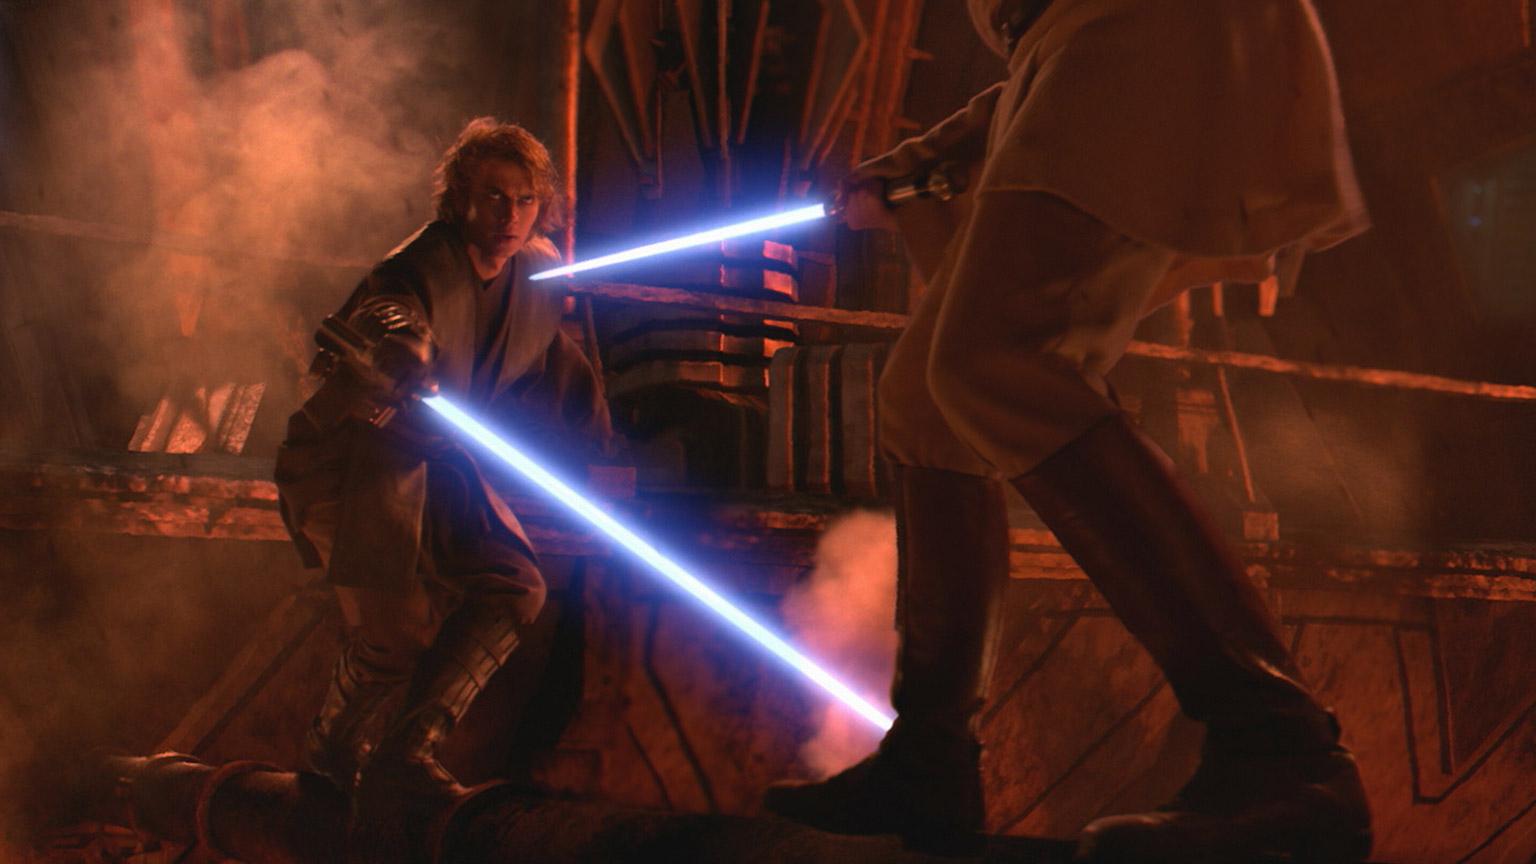 Anakin and Obi-Wan face off during their duel on Mustafar.